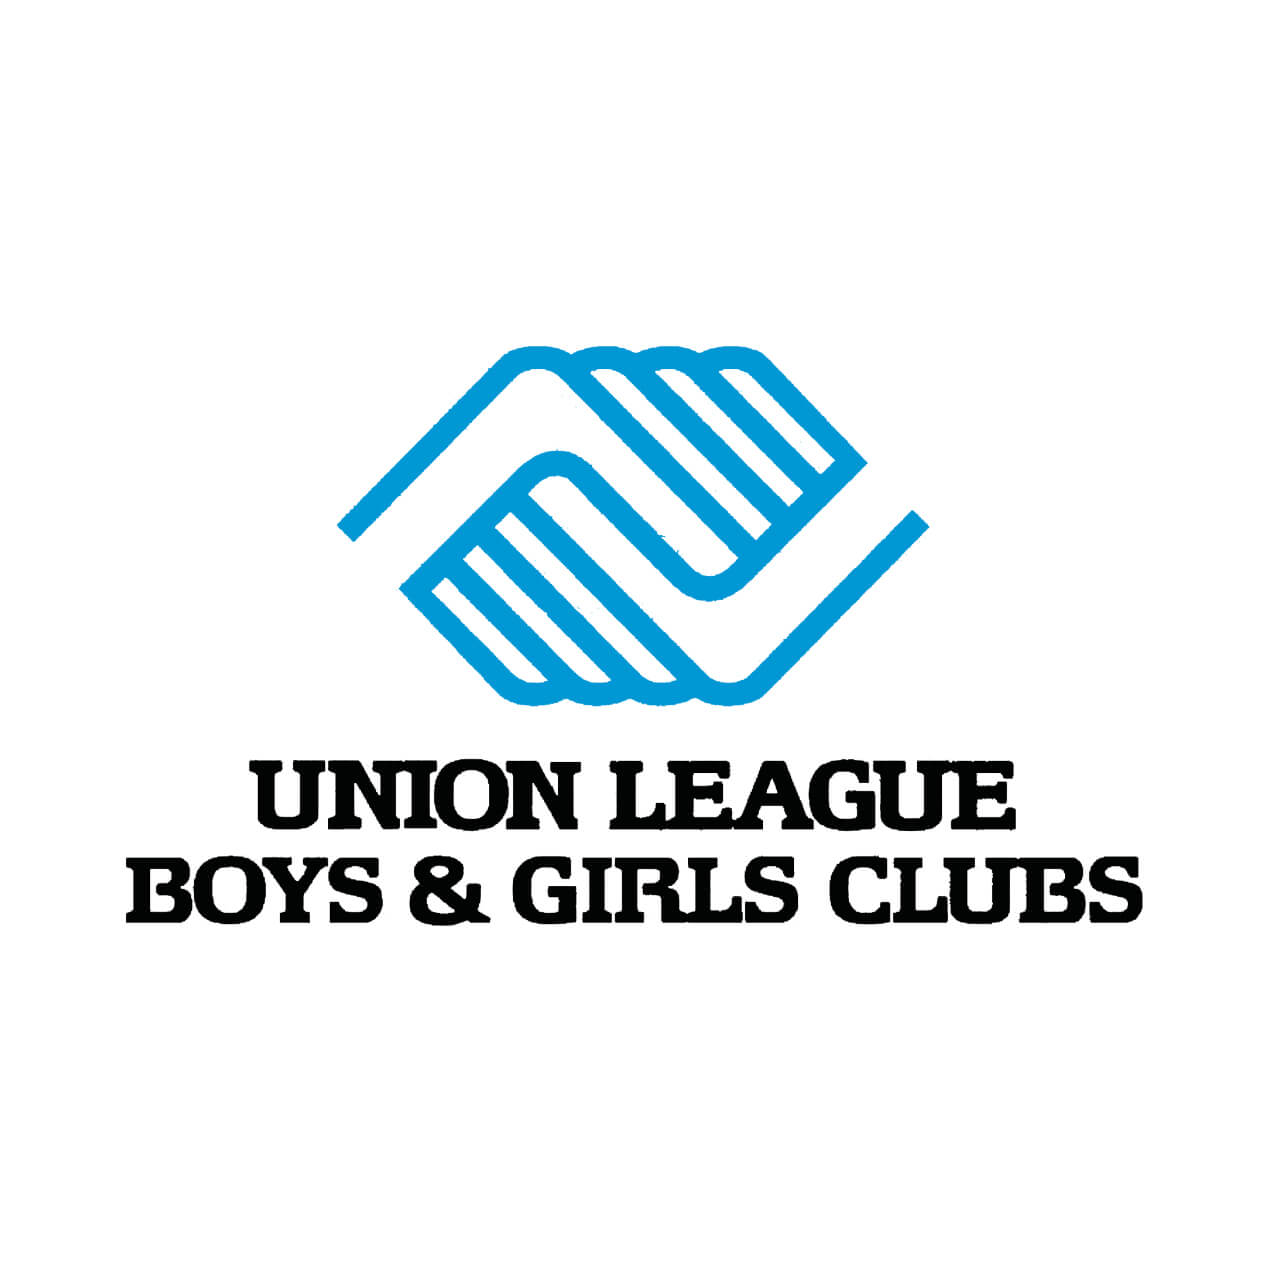 Supporting Union League Boys & Girls Clubs